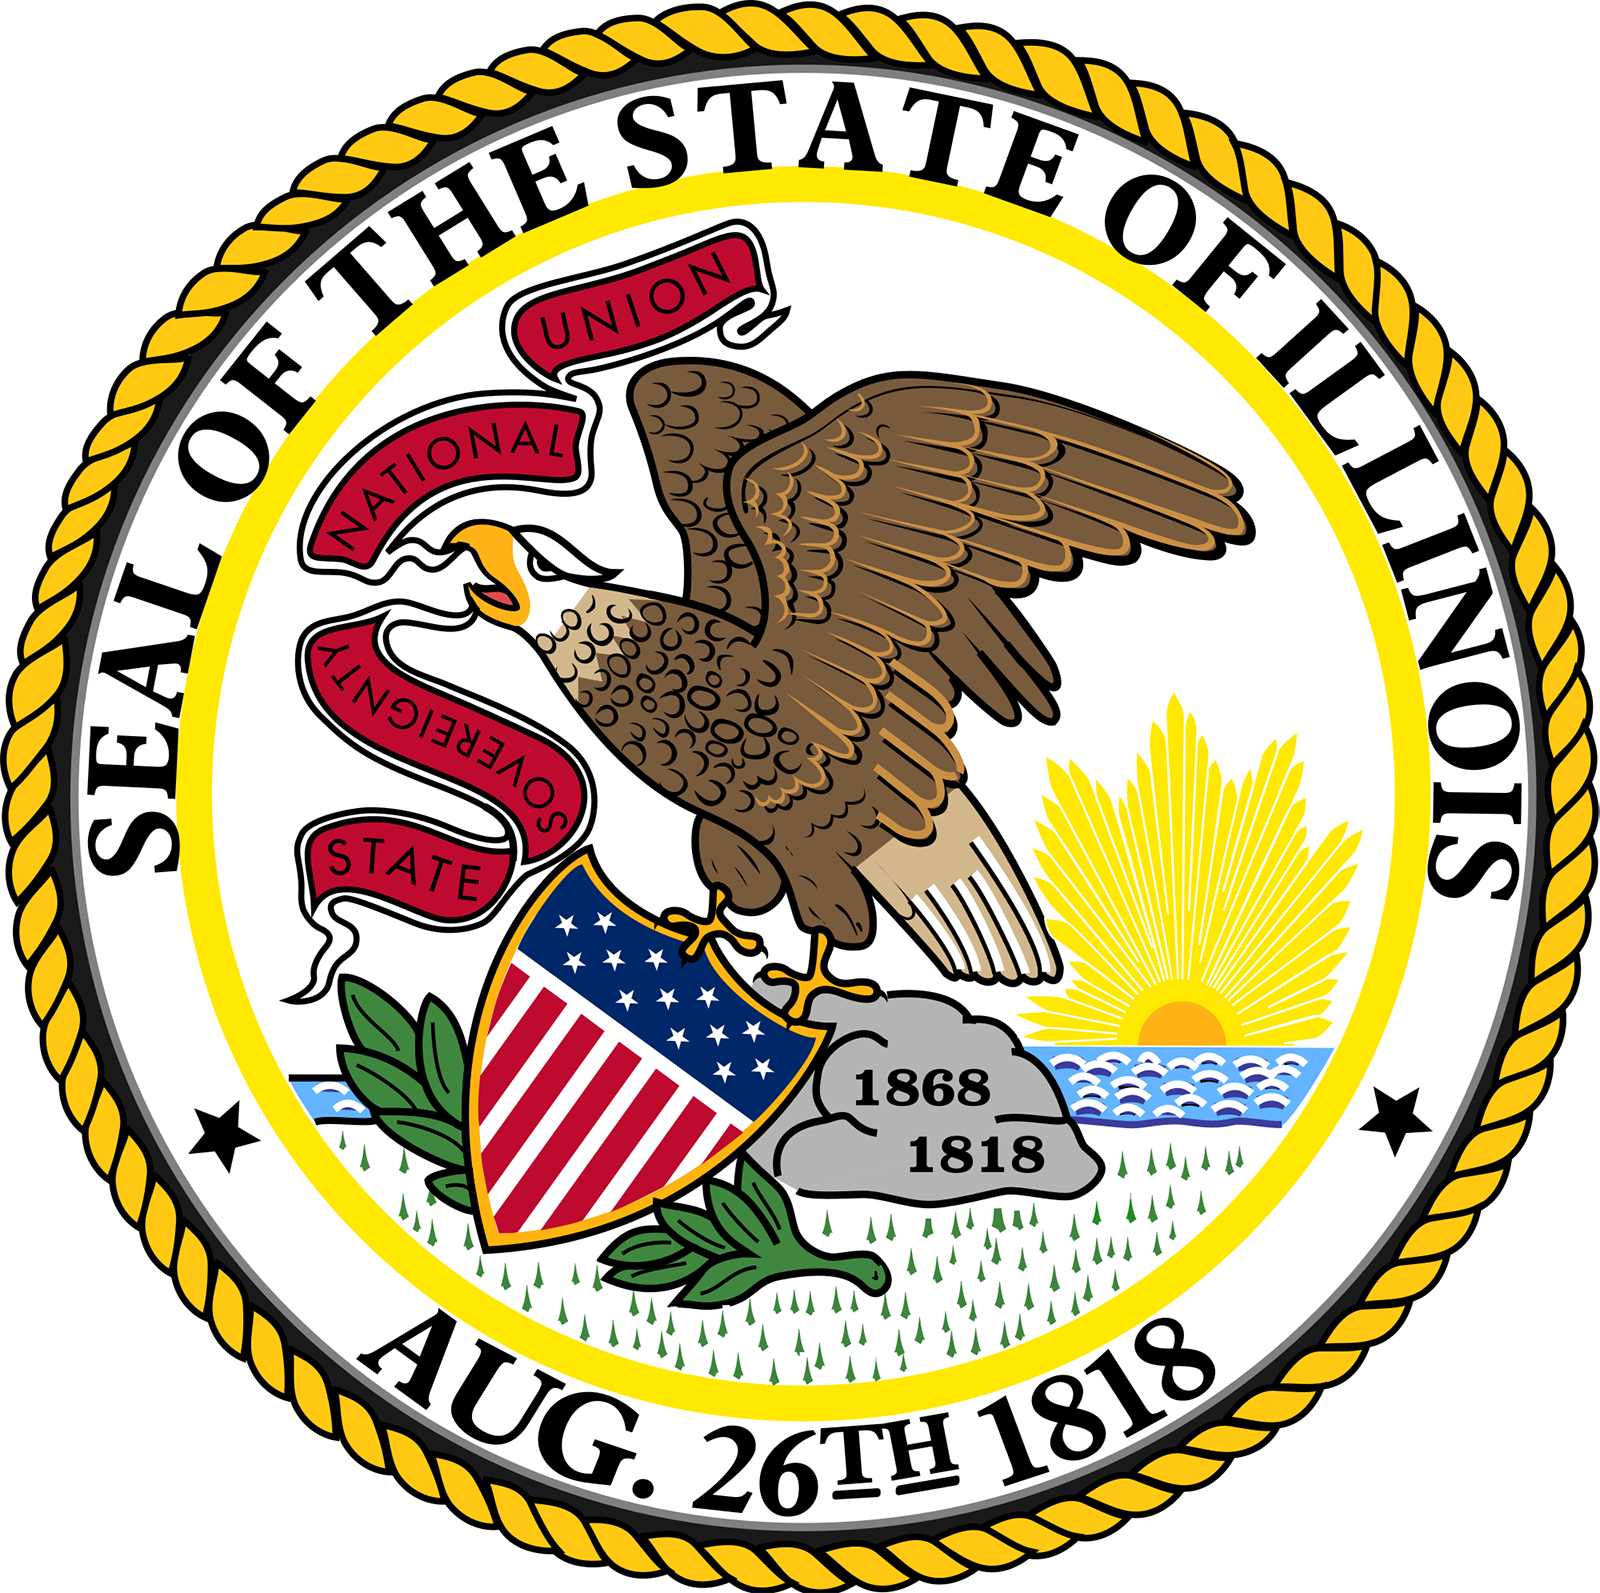 image of the seal of the state of Illinois